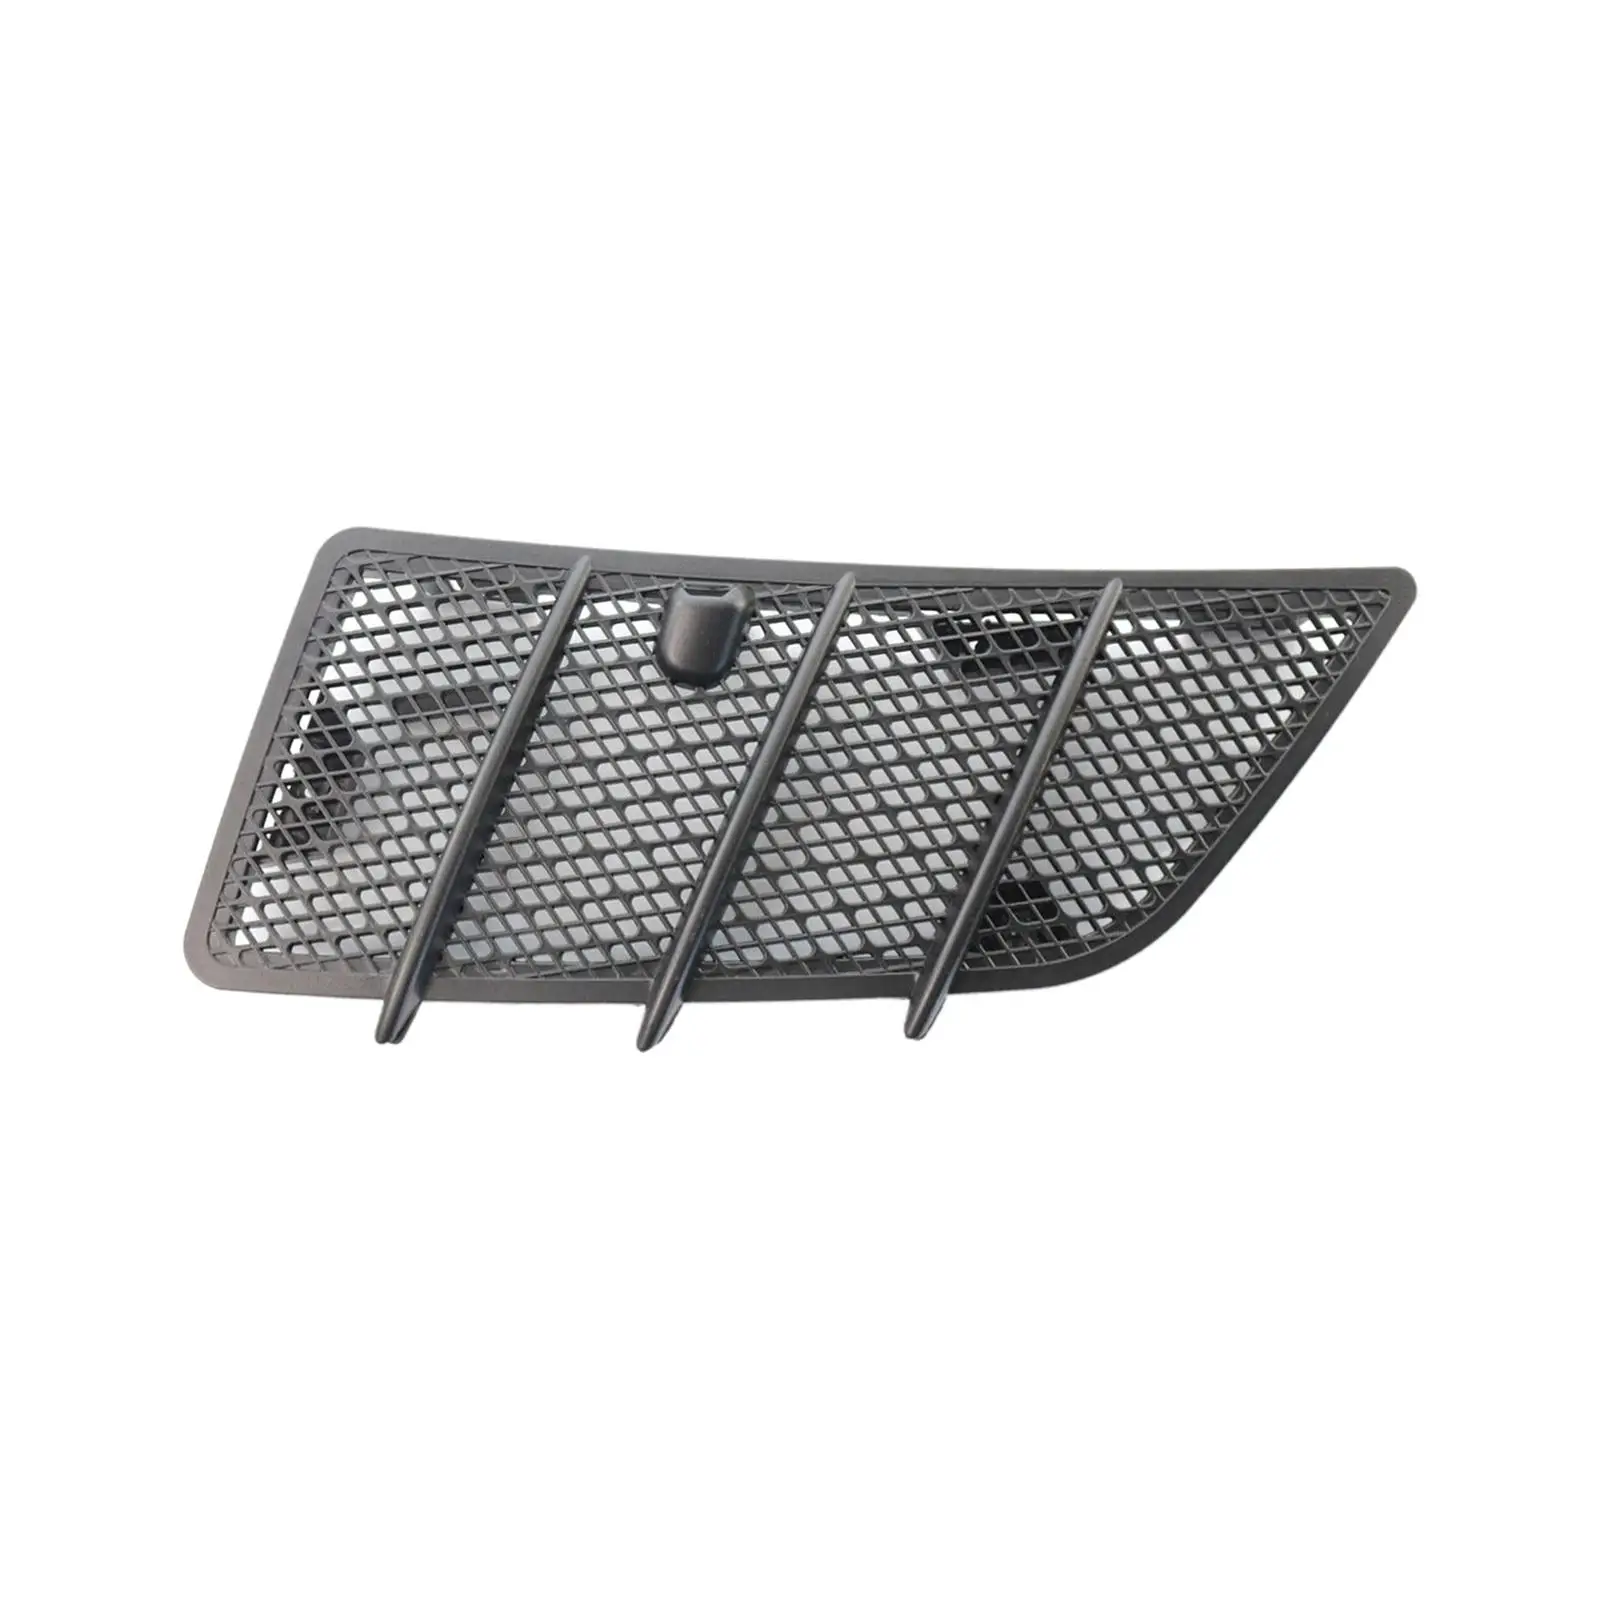 Hood Air Vent Grille Cover Directly Replace High Quality Durable for Mercedes-benz W164 ml GL Class Automotive Accessories